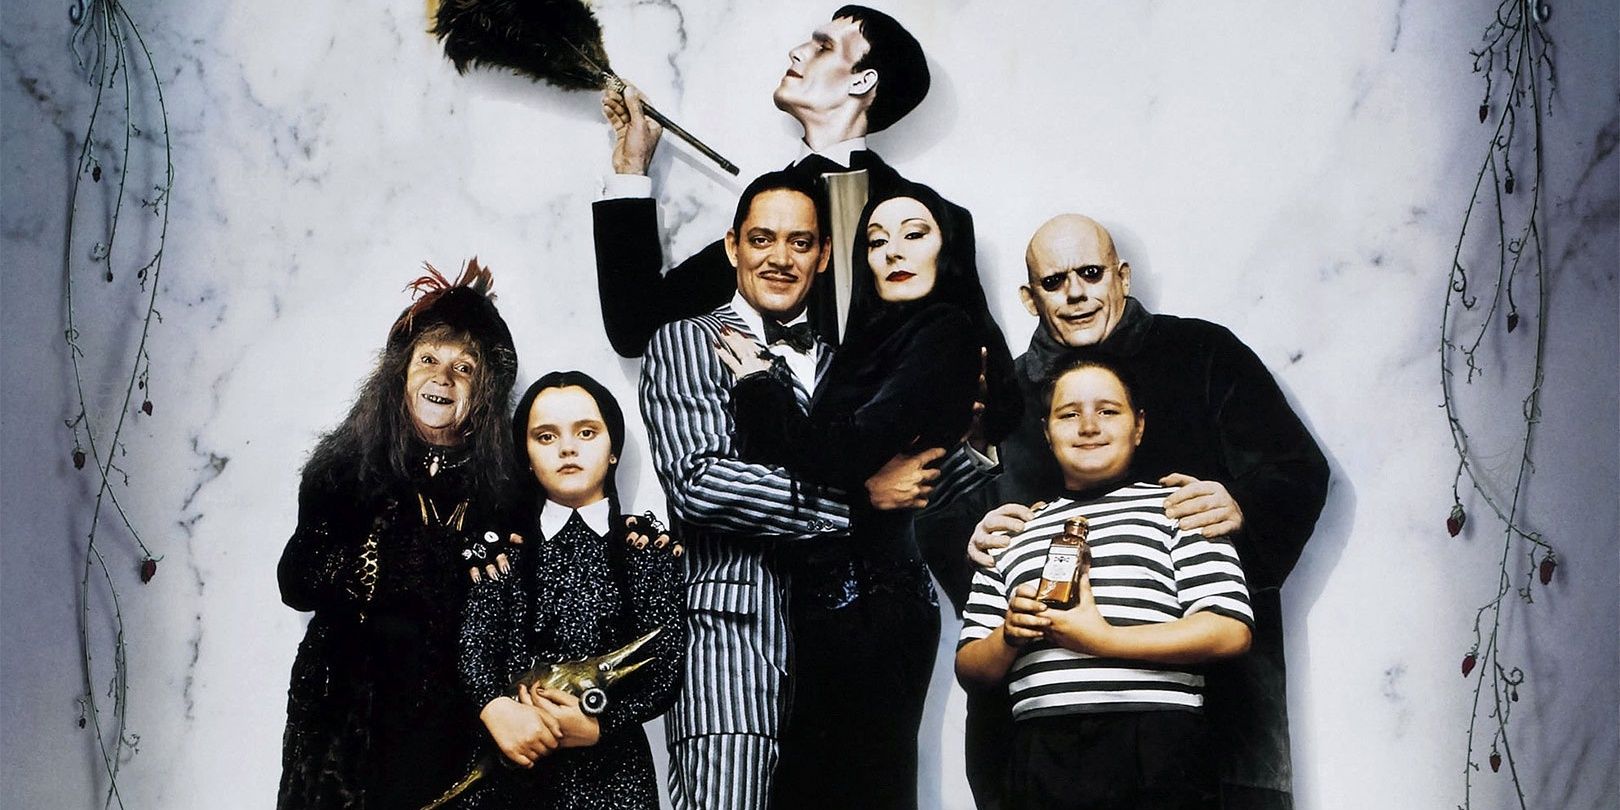 The Nightmare Before Christmas 10 Movies To Watch If You Love It